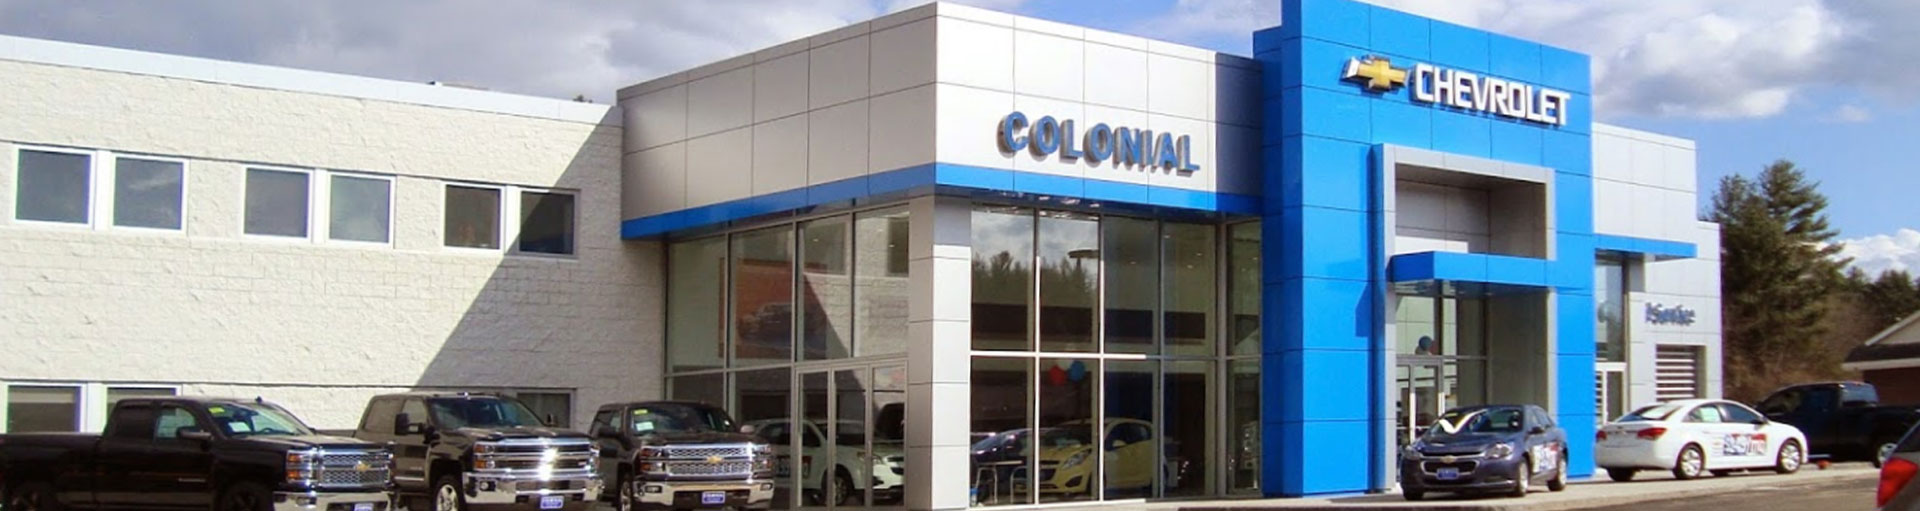 Colonial Chevrolet of Acton Dare To Compare